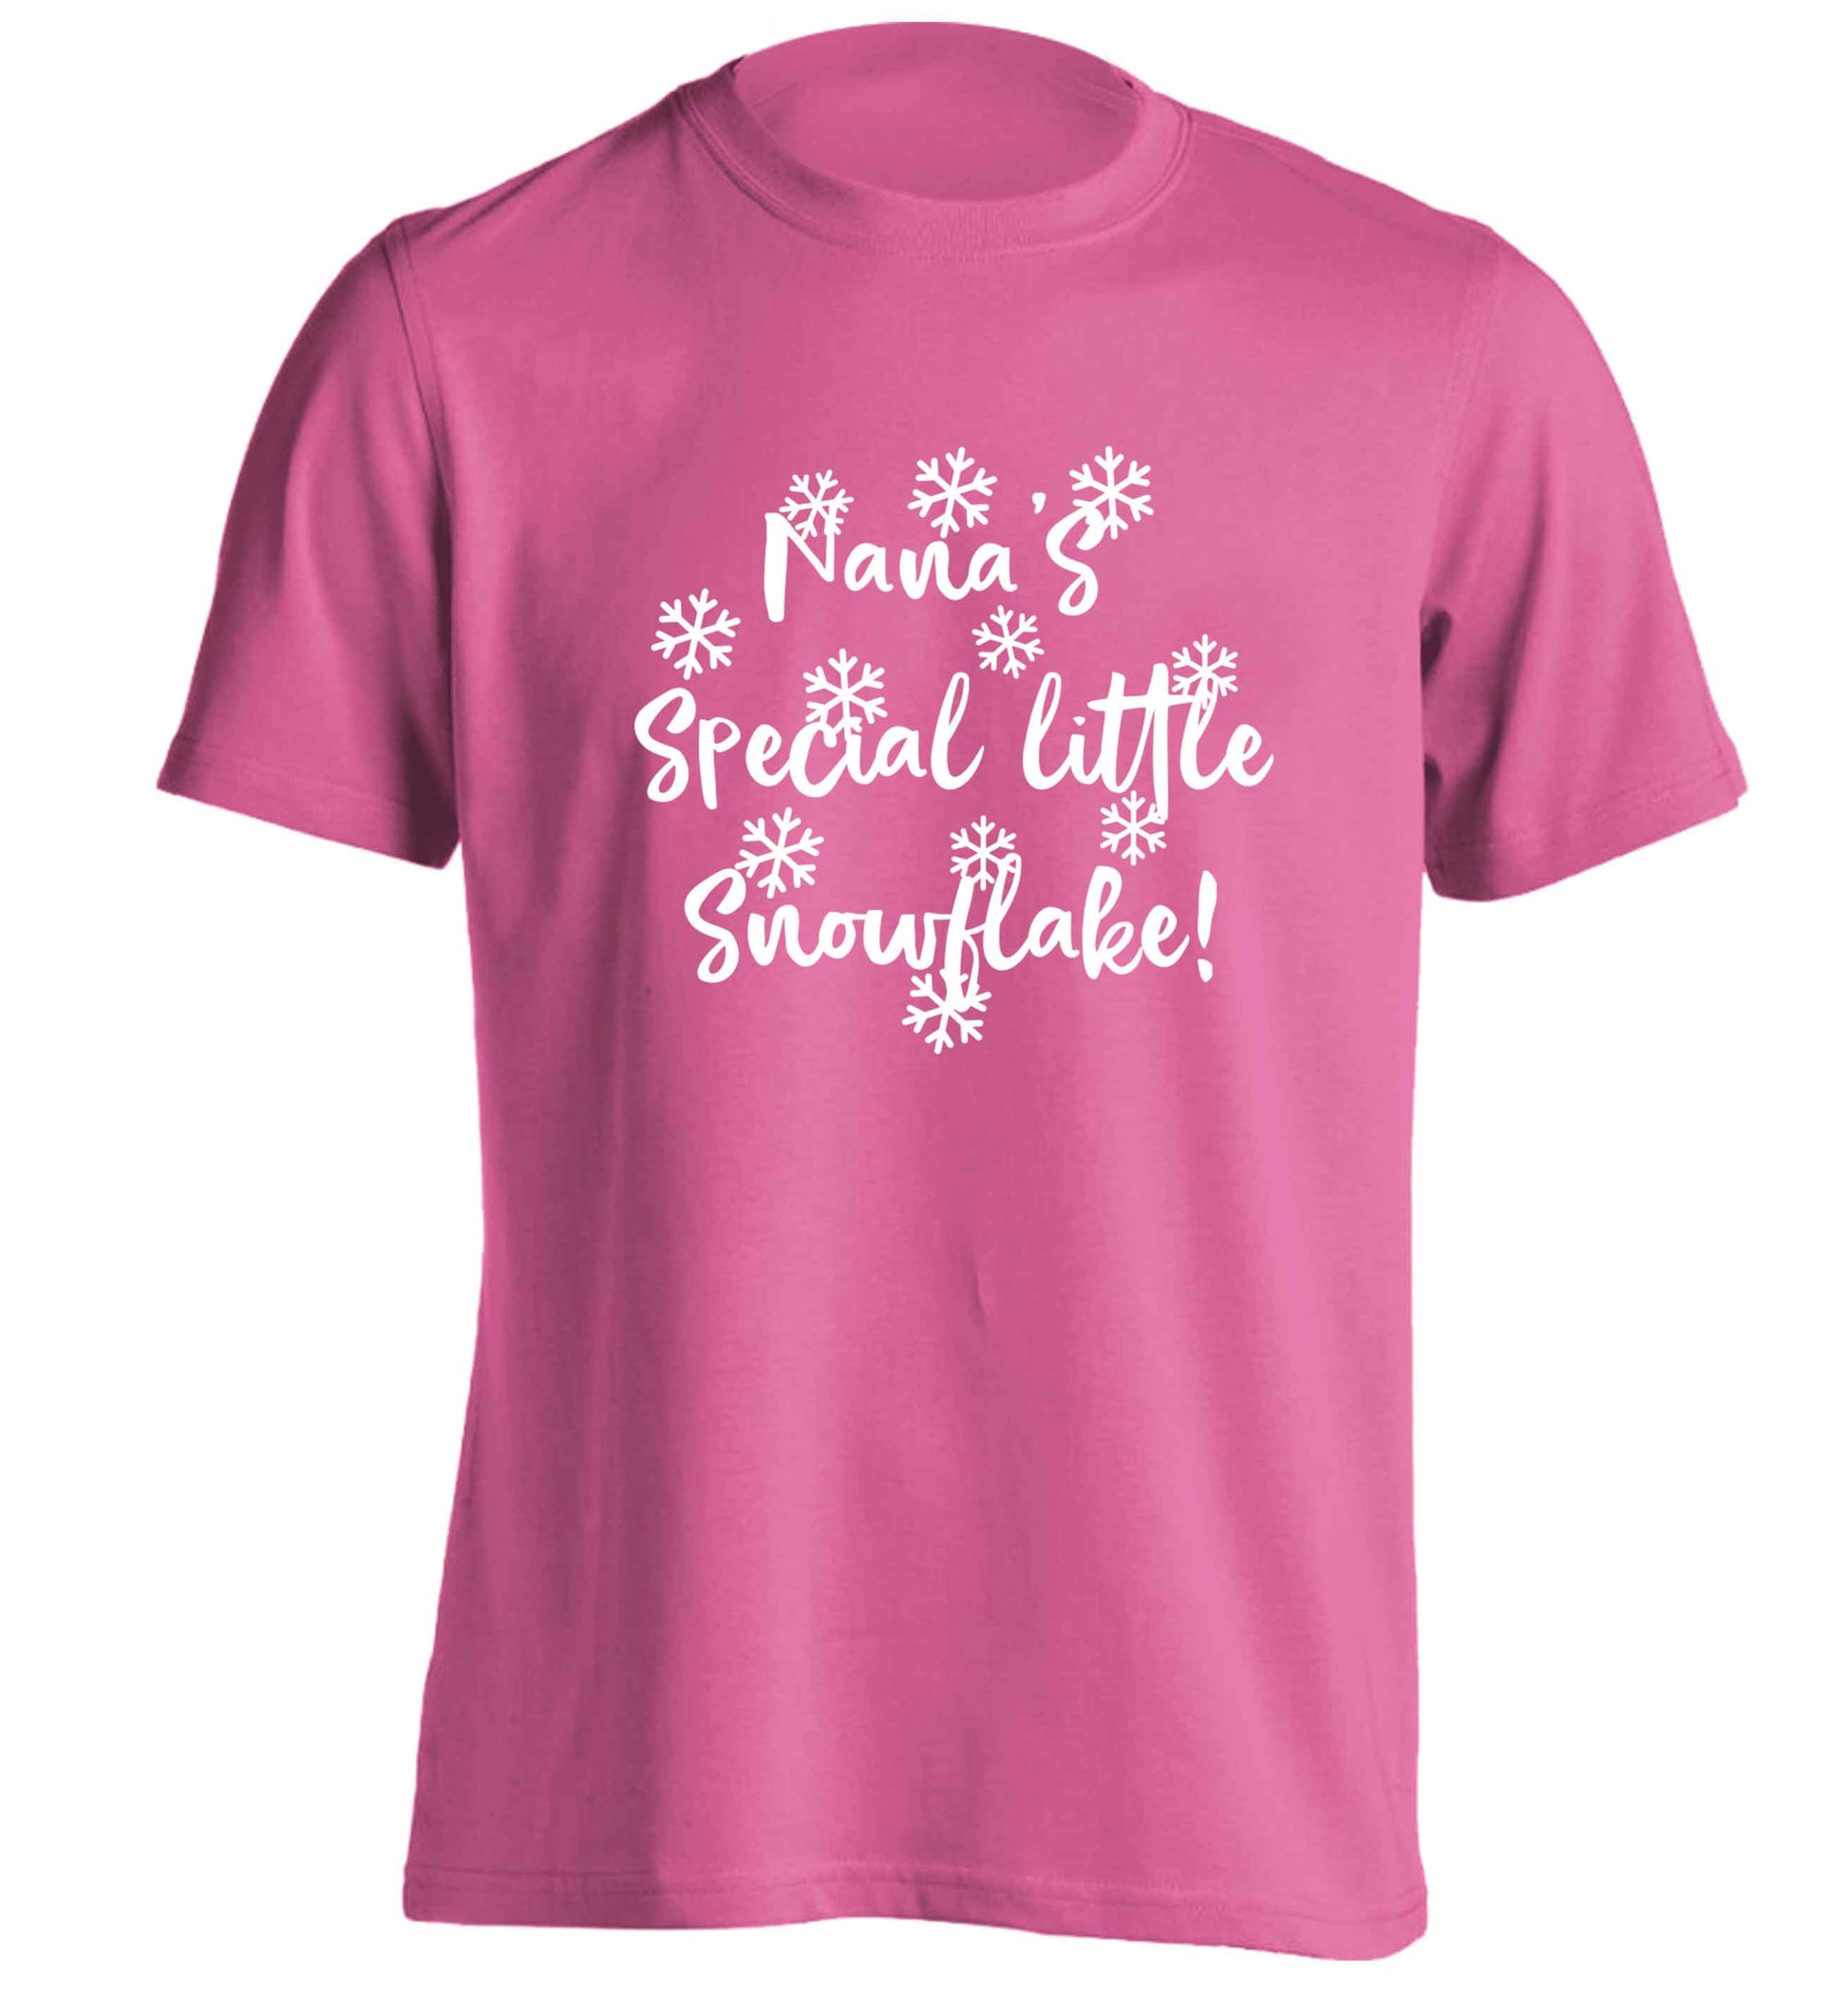 Nana's special little snowflake adults unisex pink Tshirt 2XL